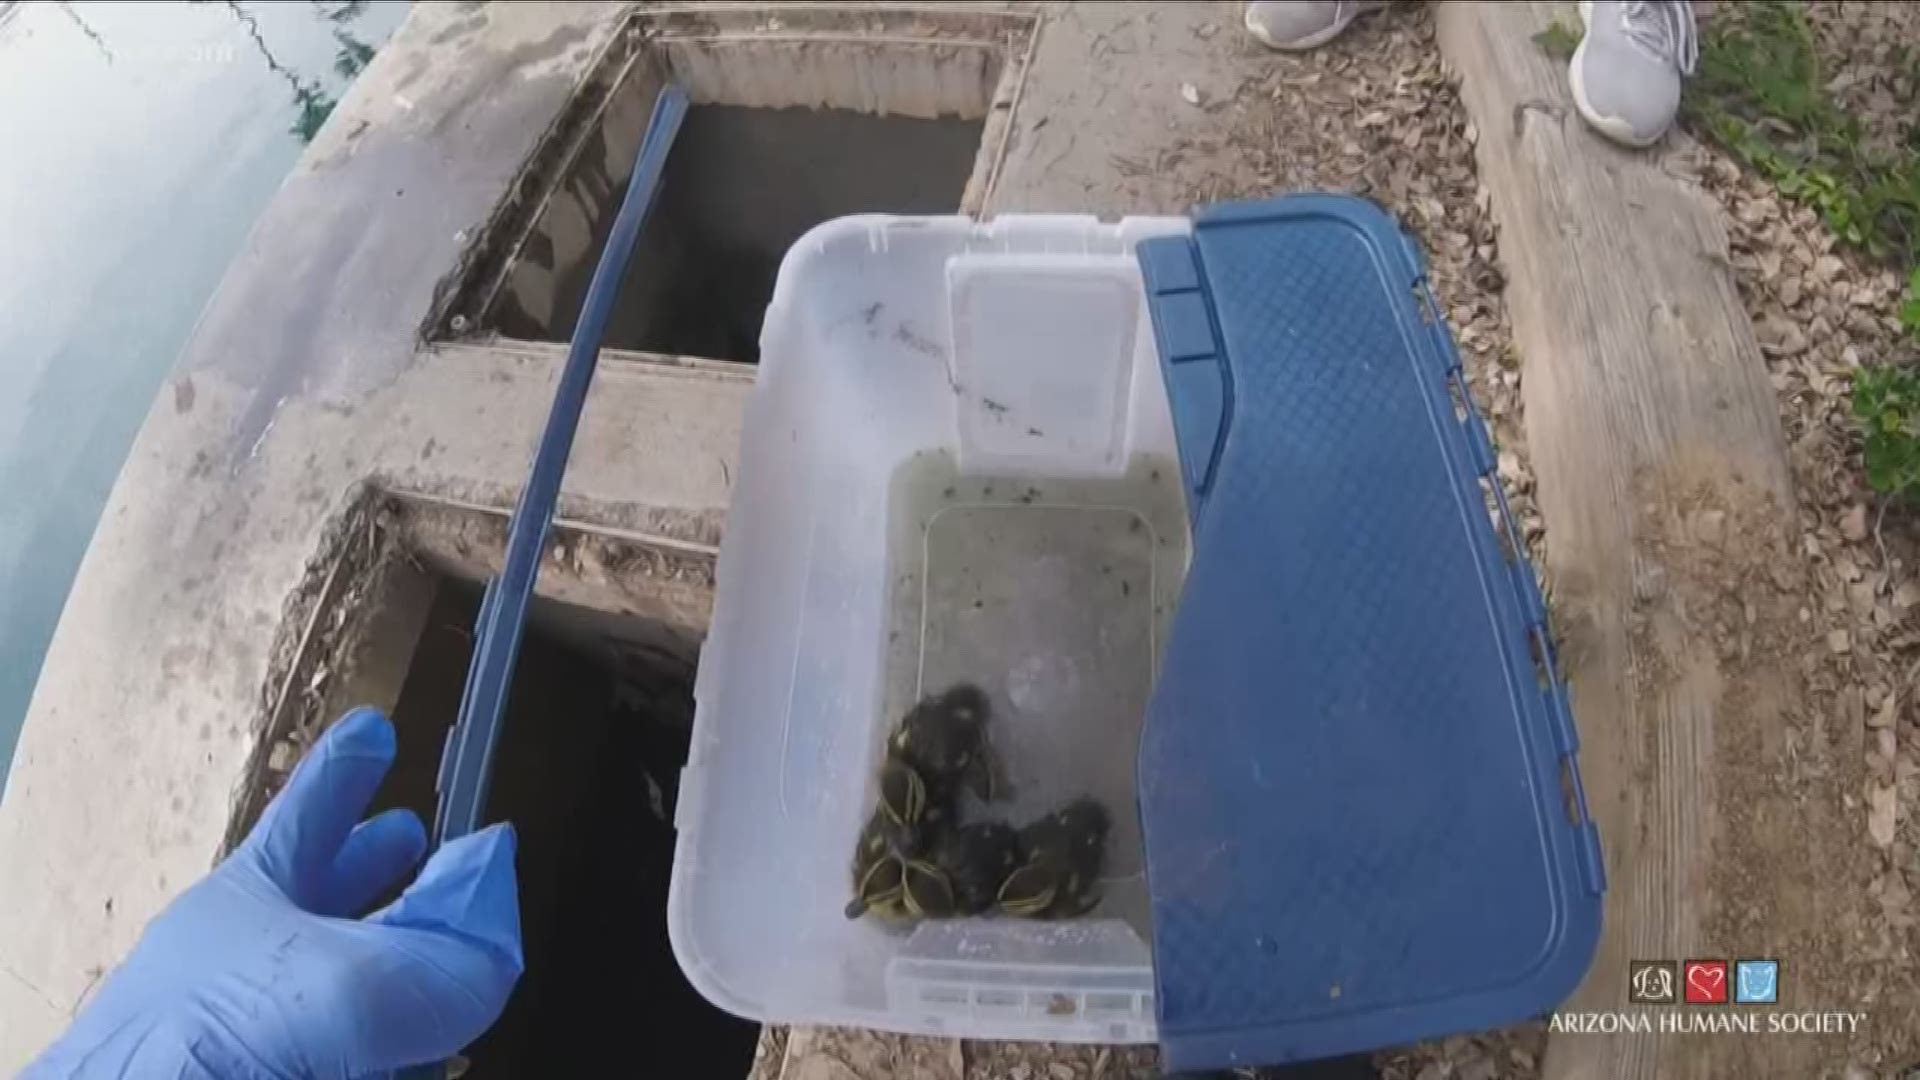 Arizona Humane Society rescued a family of ducklings. They were reunited with their parents in East Mesa.